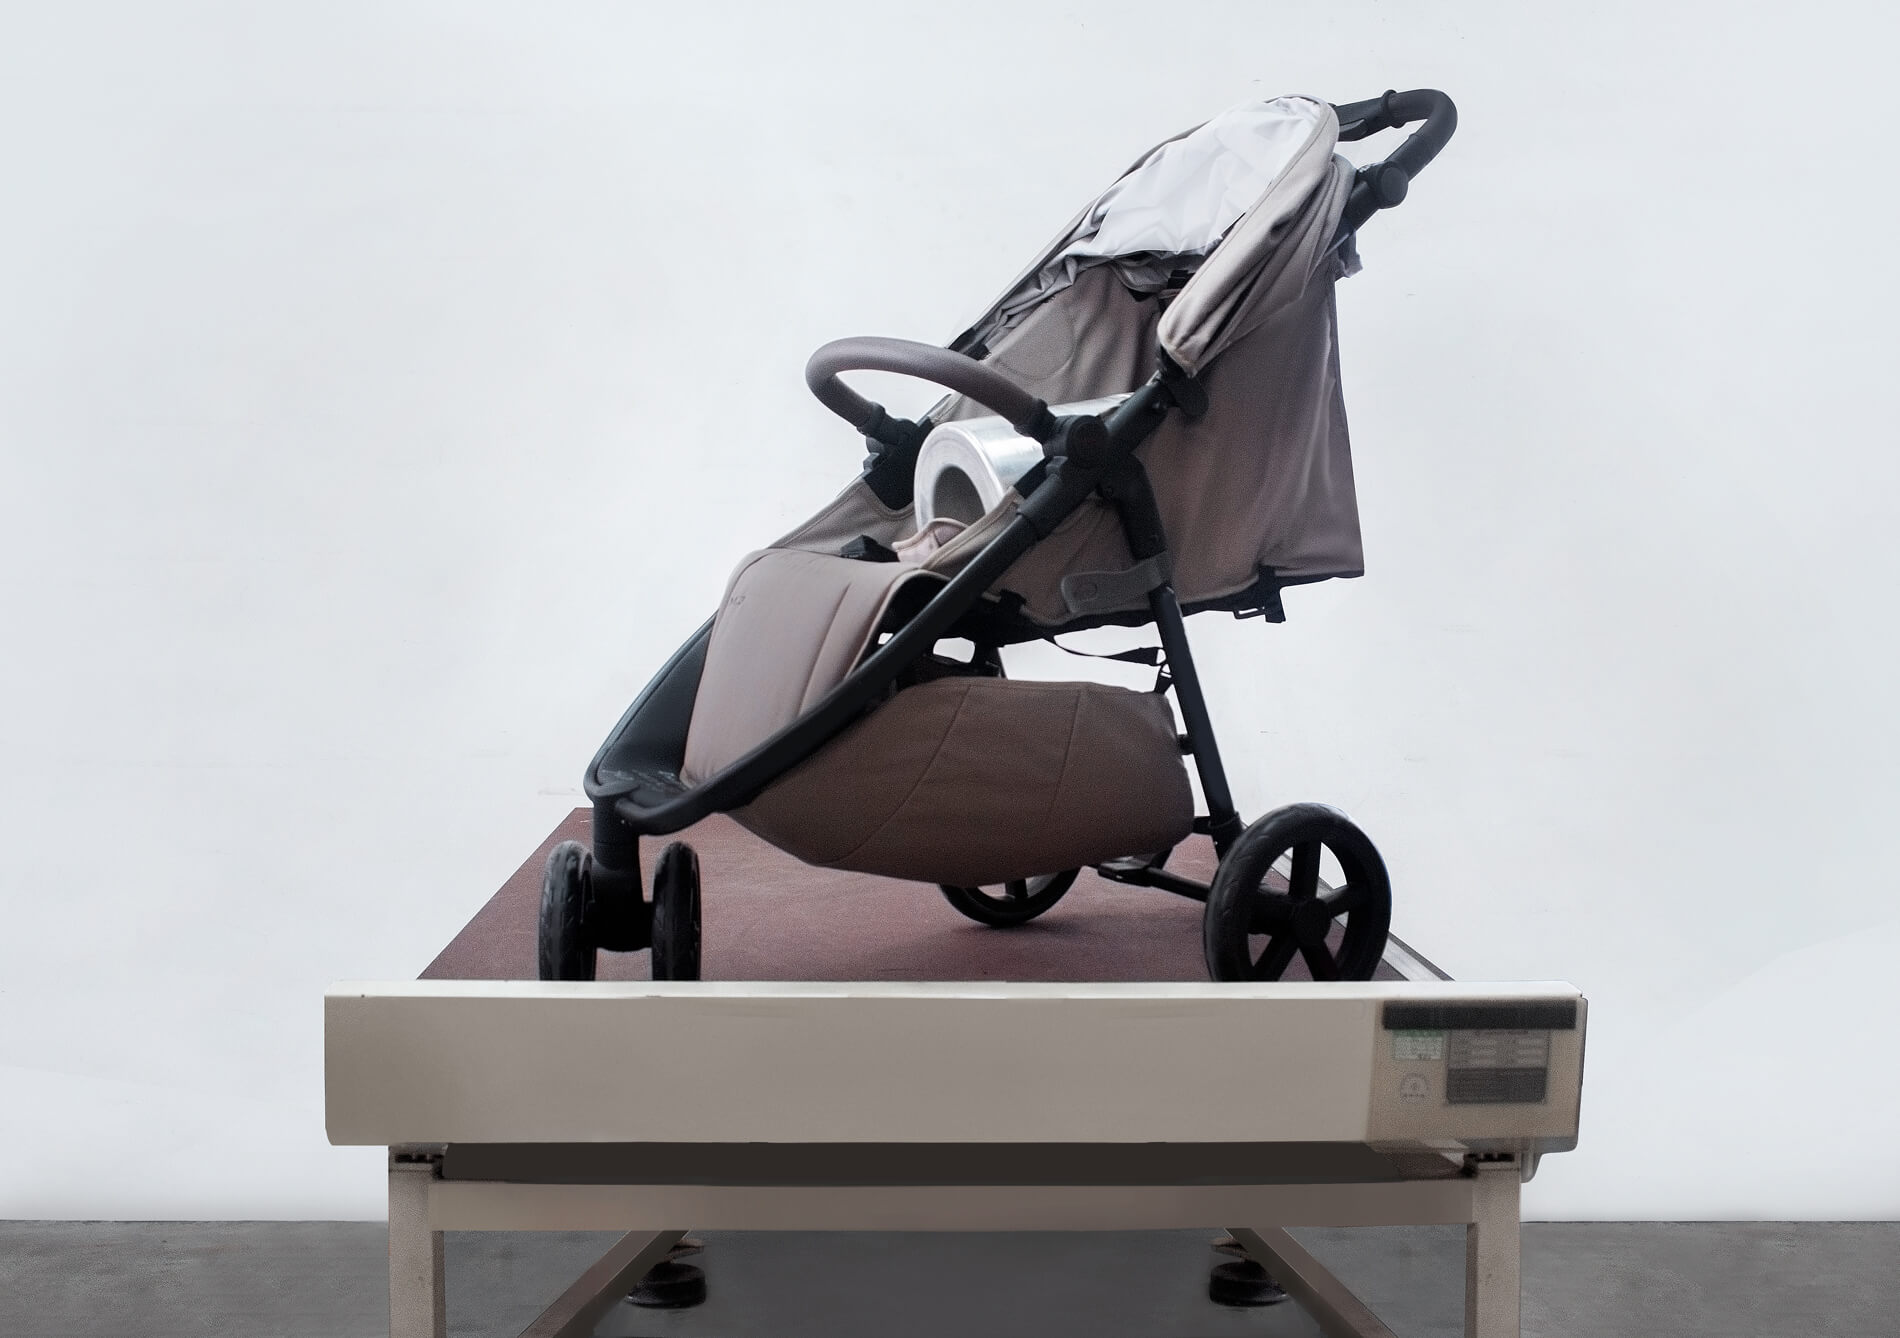 River Baby stroller stability testing